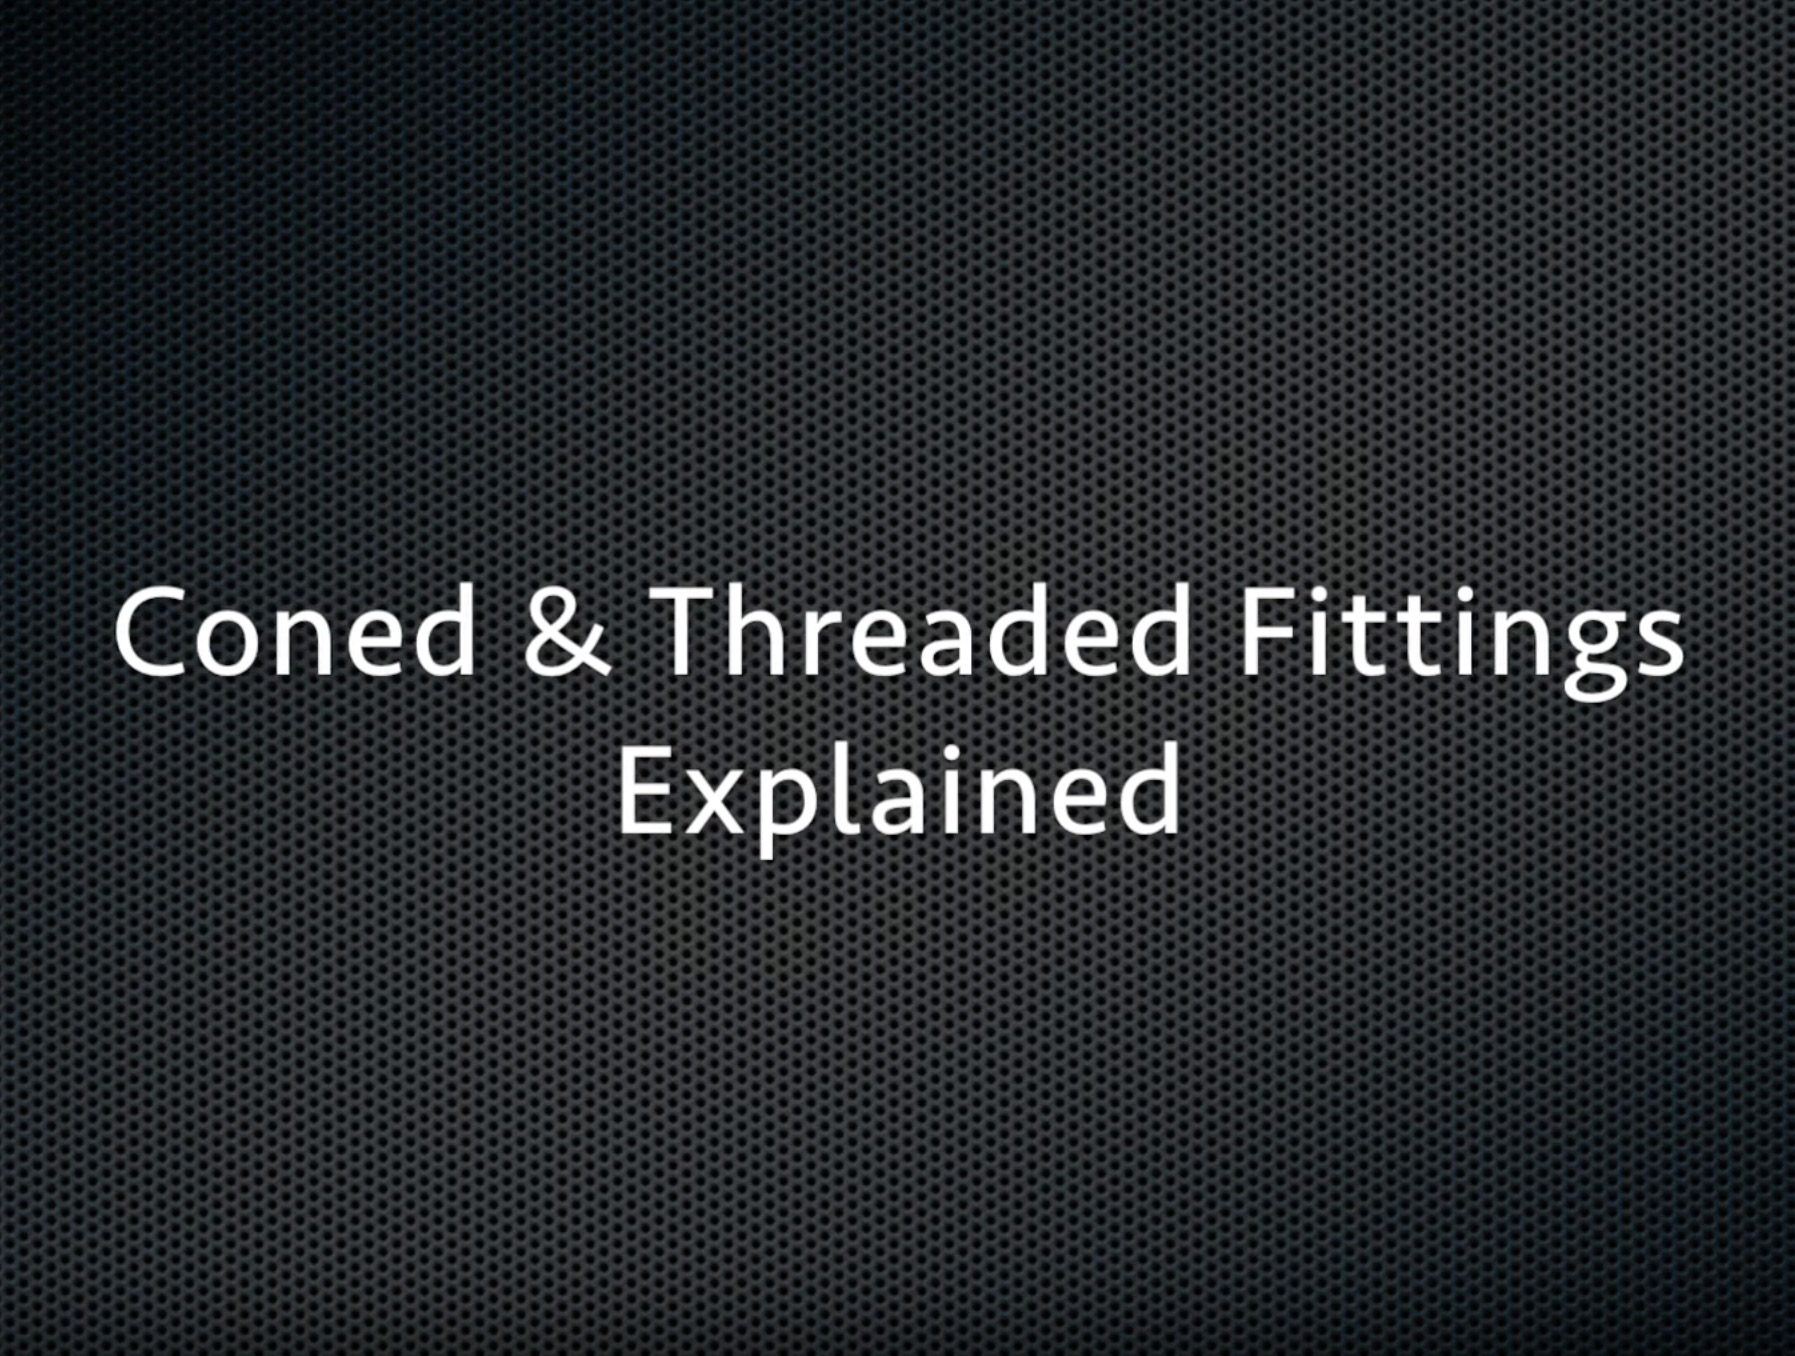 Video: Coned & Threaded Fittings Explained